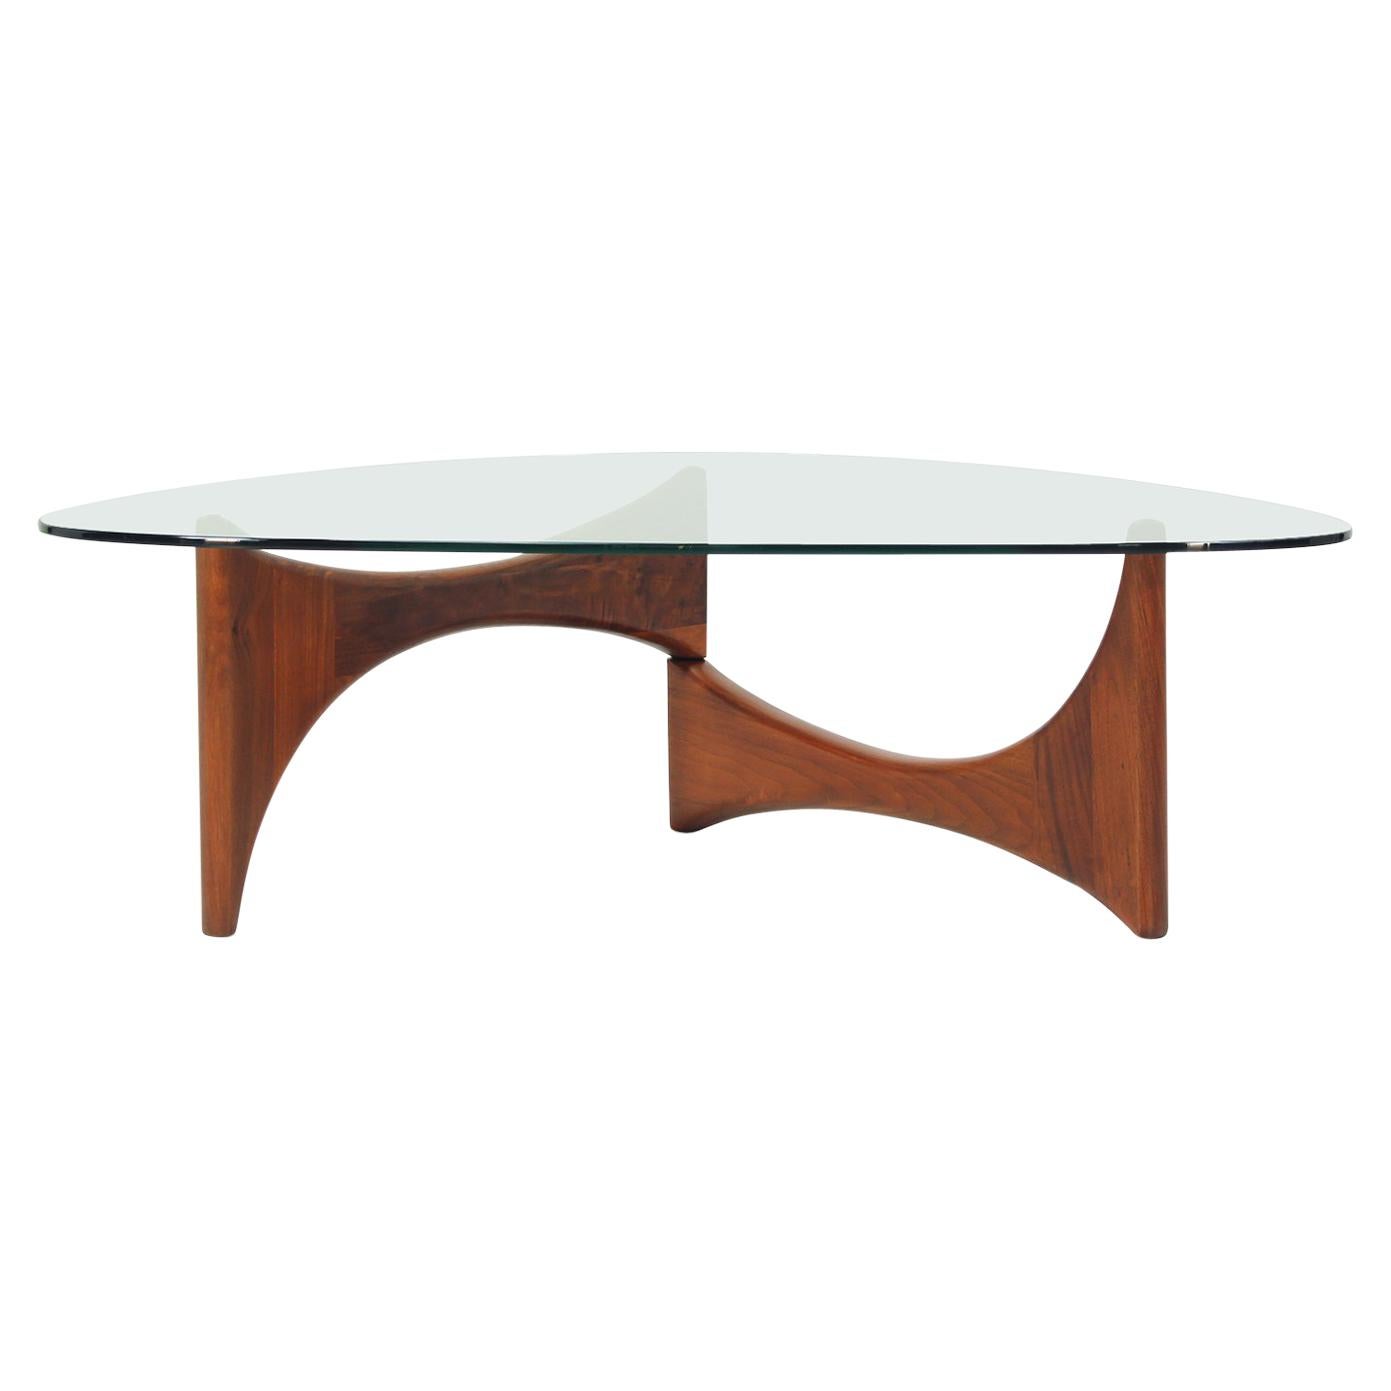 Adrian Pearsall Triangular Glass Top Coffee Table for Craft Associates